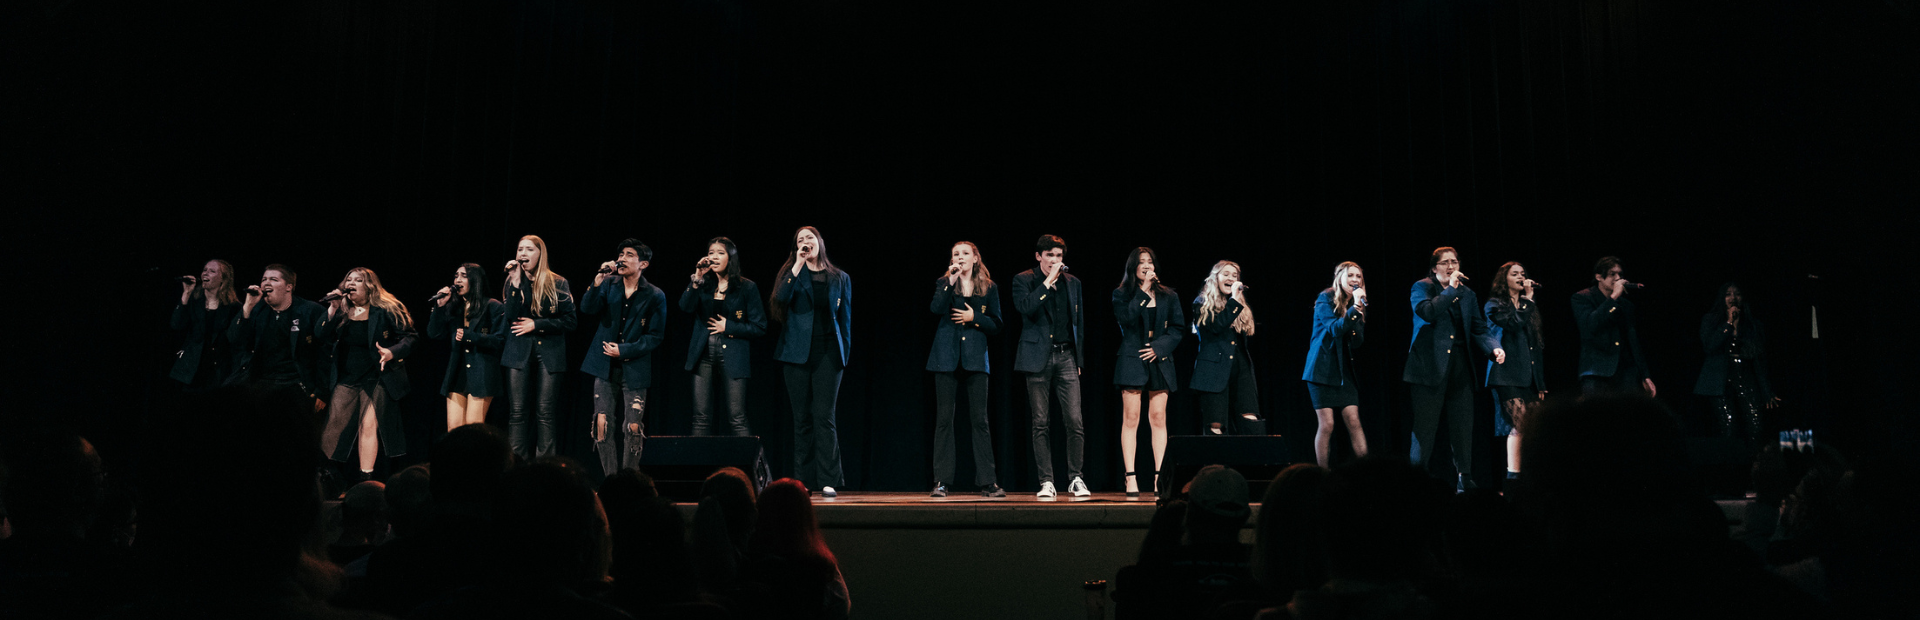 Ramsey High School's a capella group "Ram Jams" performs on stage. 